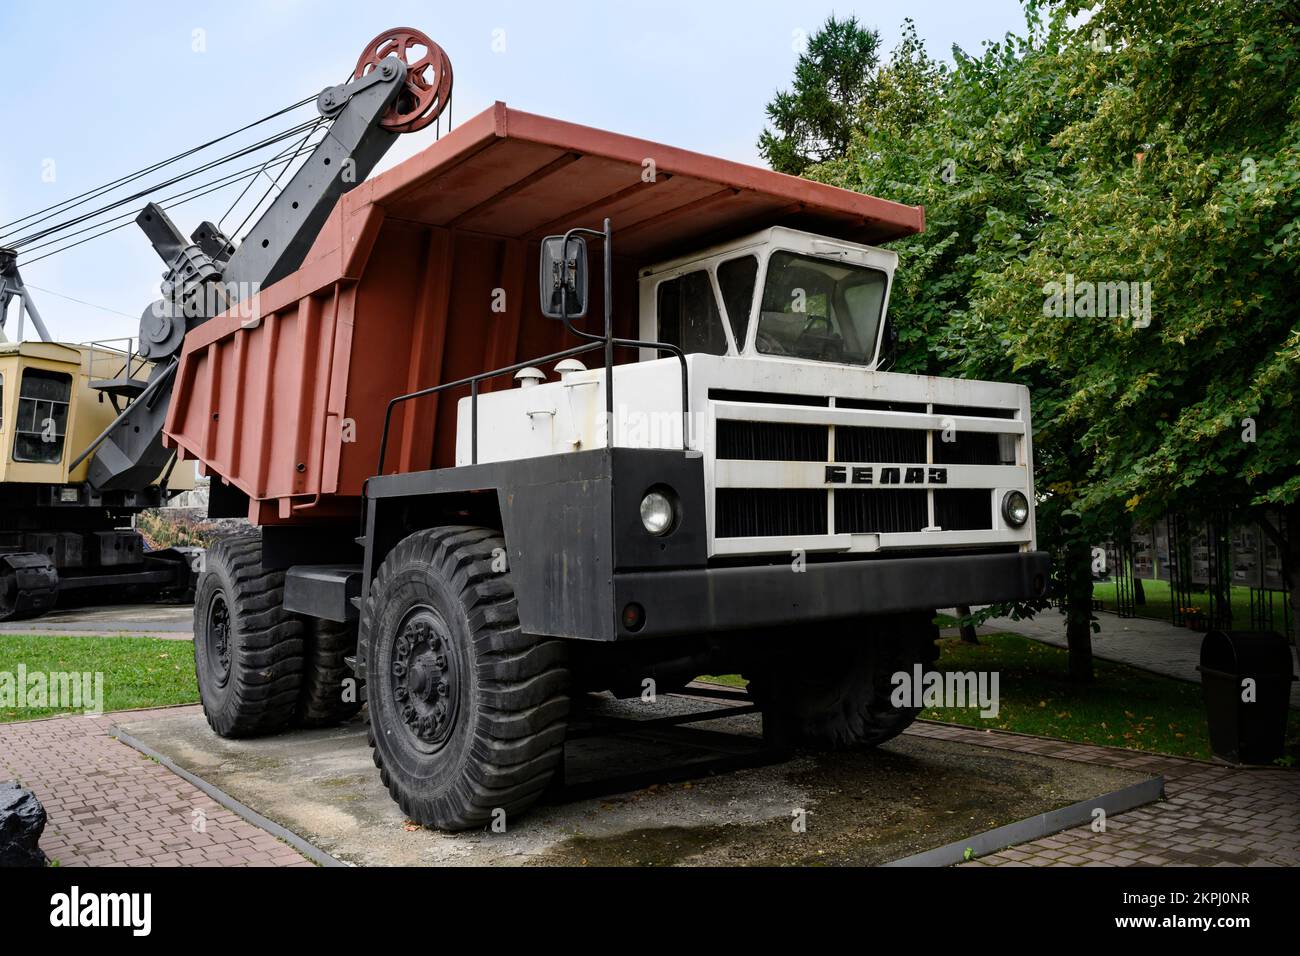 A dump truck manufactured in Belarus, with a load capacity of 30 tons, was used in the 1980s at coal pits in Kemerovo, Russia Stock Photo